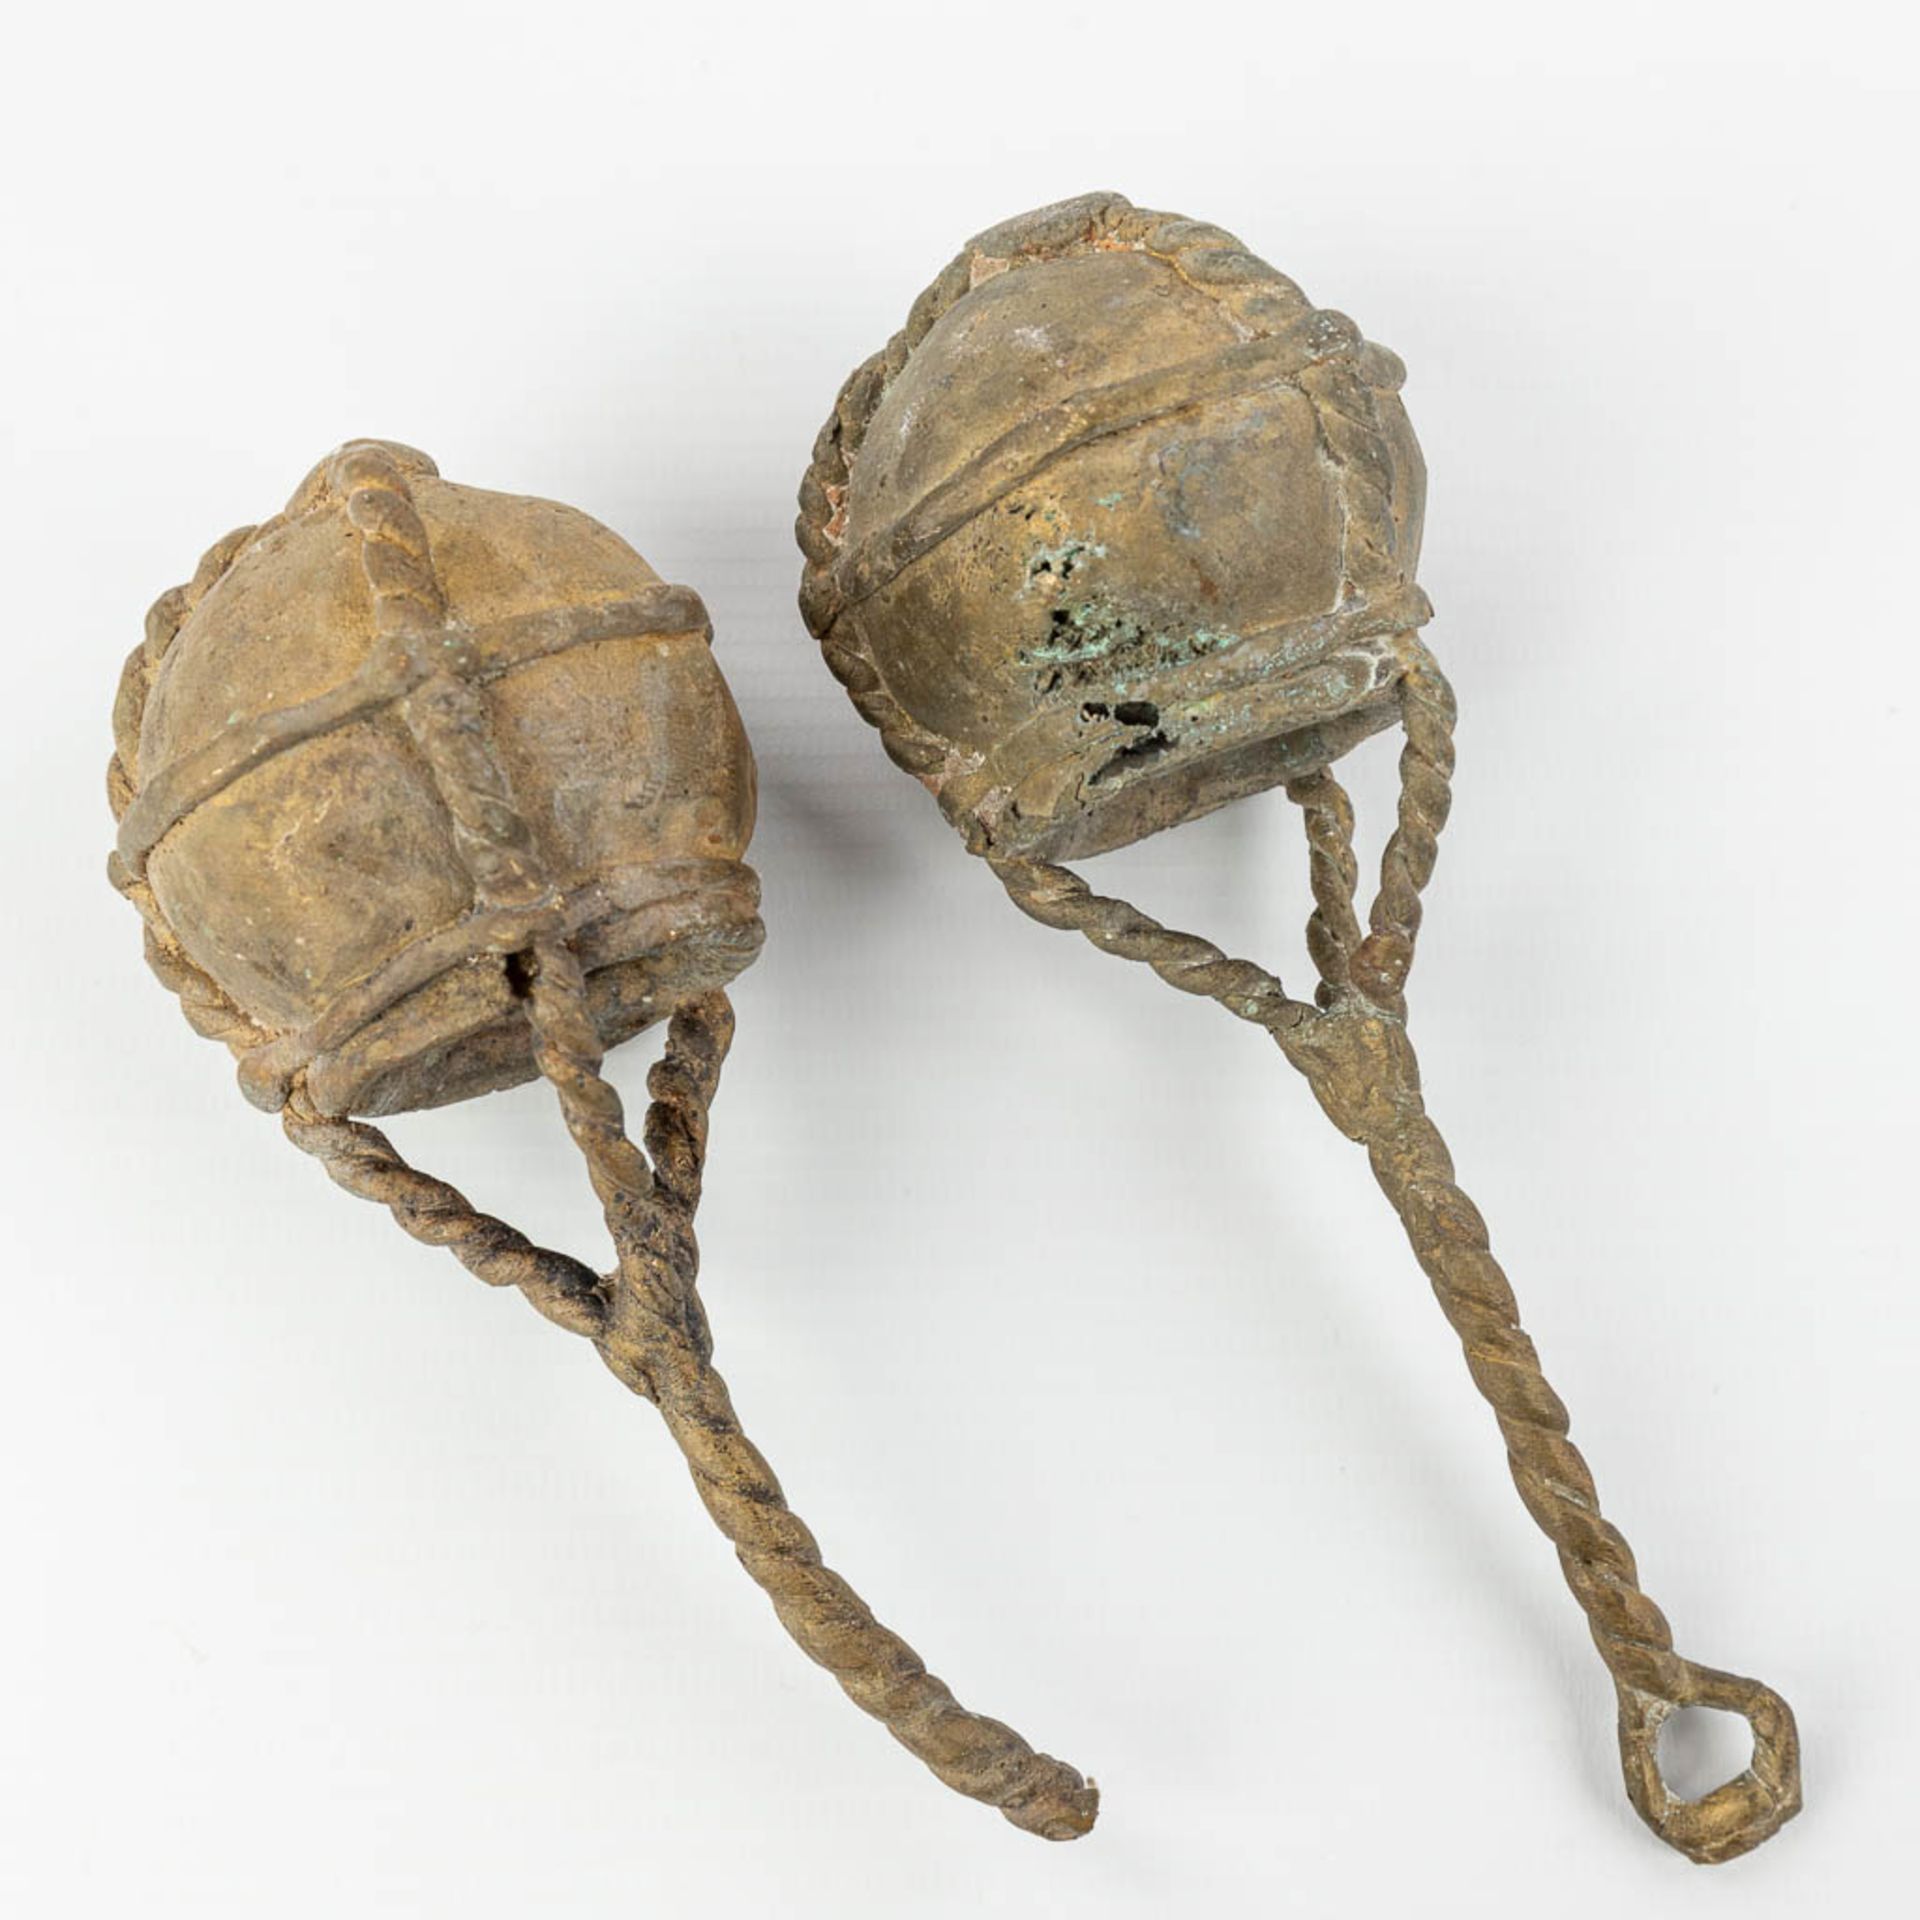 A set of 2 bronze statues of Asian figurines with baskets. (H:36cm) - Image 11 of 11